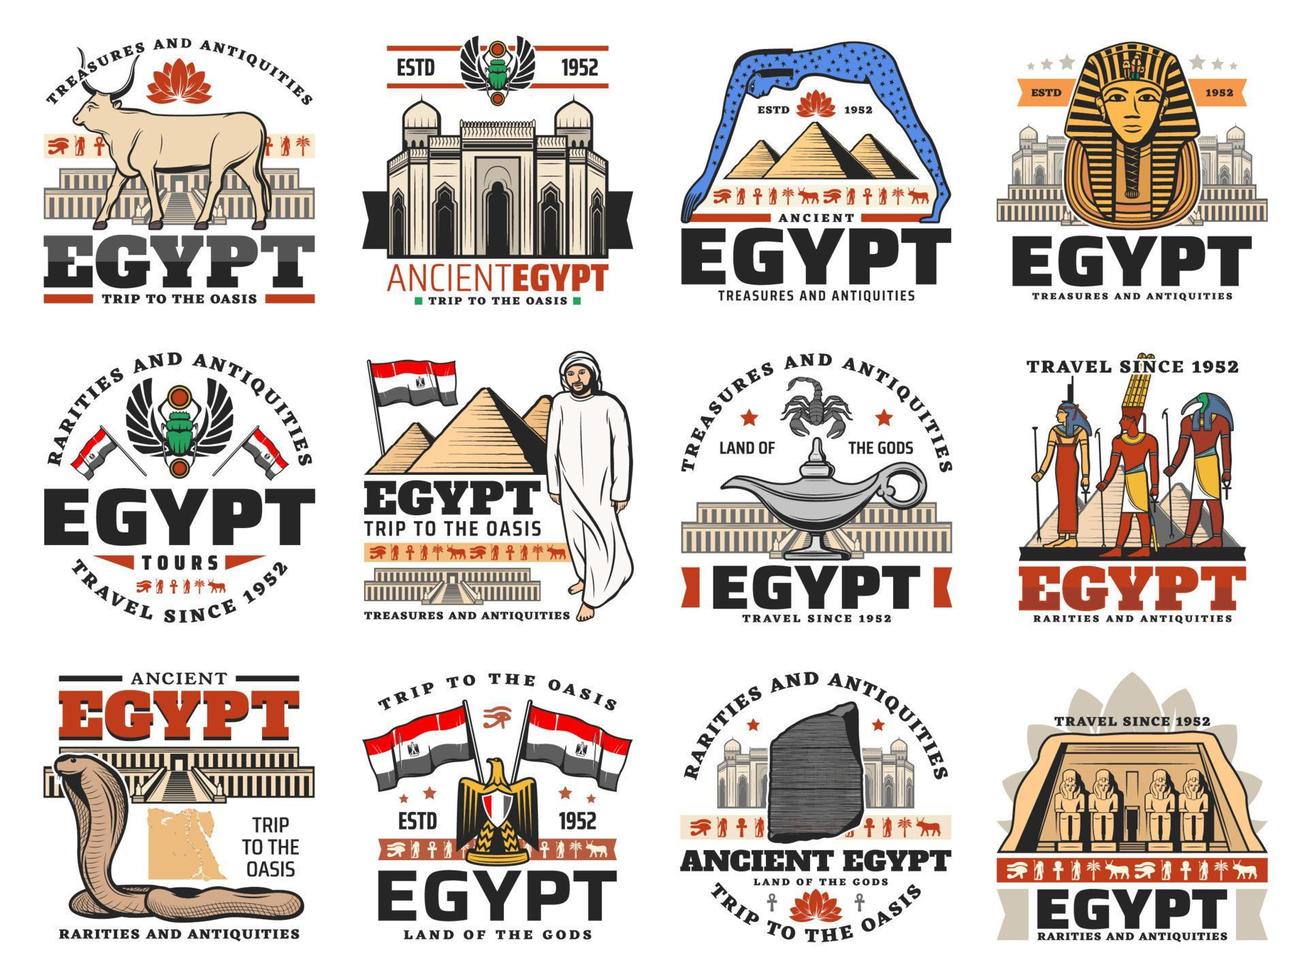 Ancient Egypt pyramid, god, map and flag icons vector